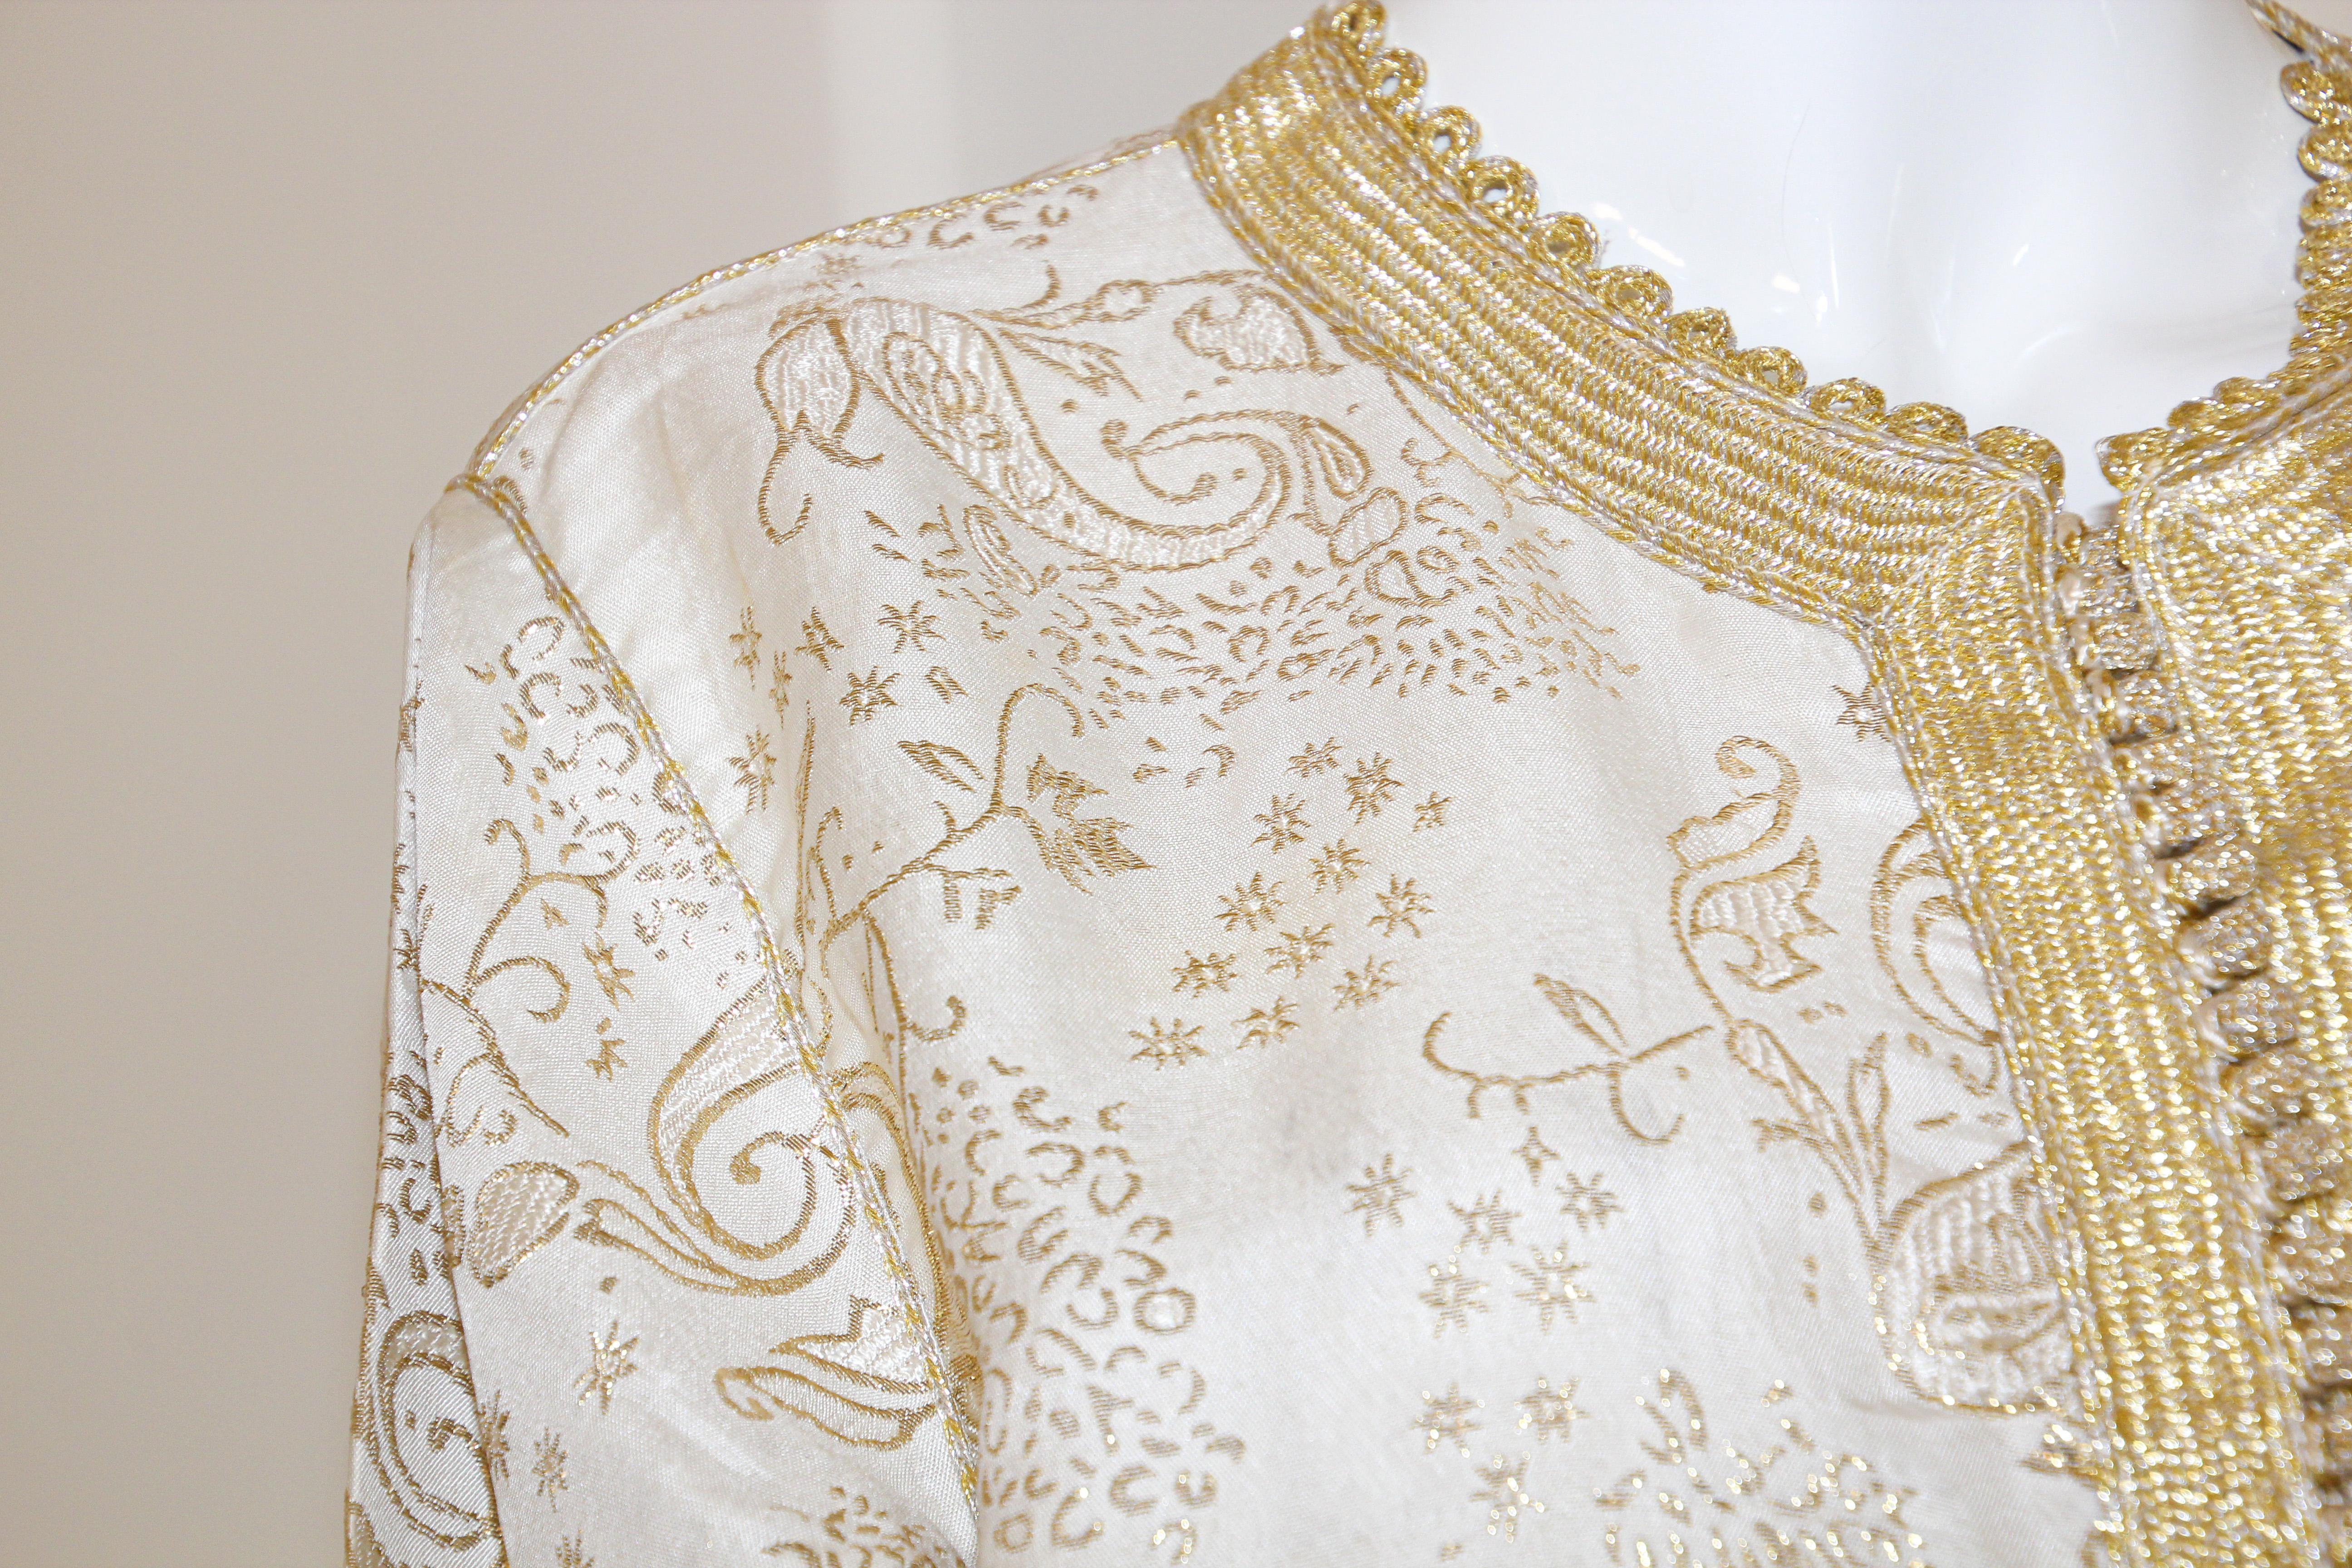 Elegant Moroccan White Caftan with Gold Metallic Floral Brocade For Sale 2